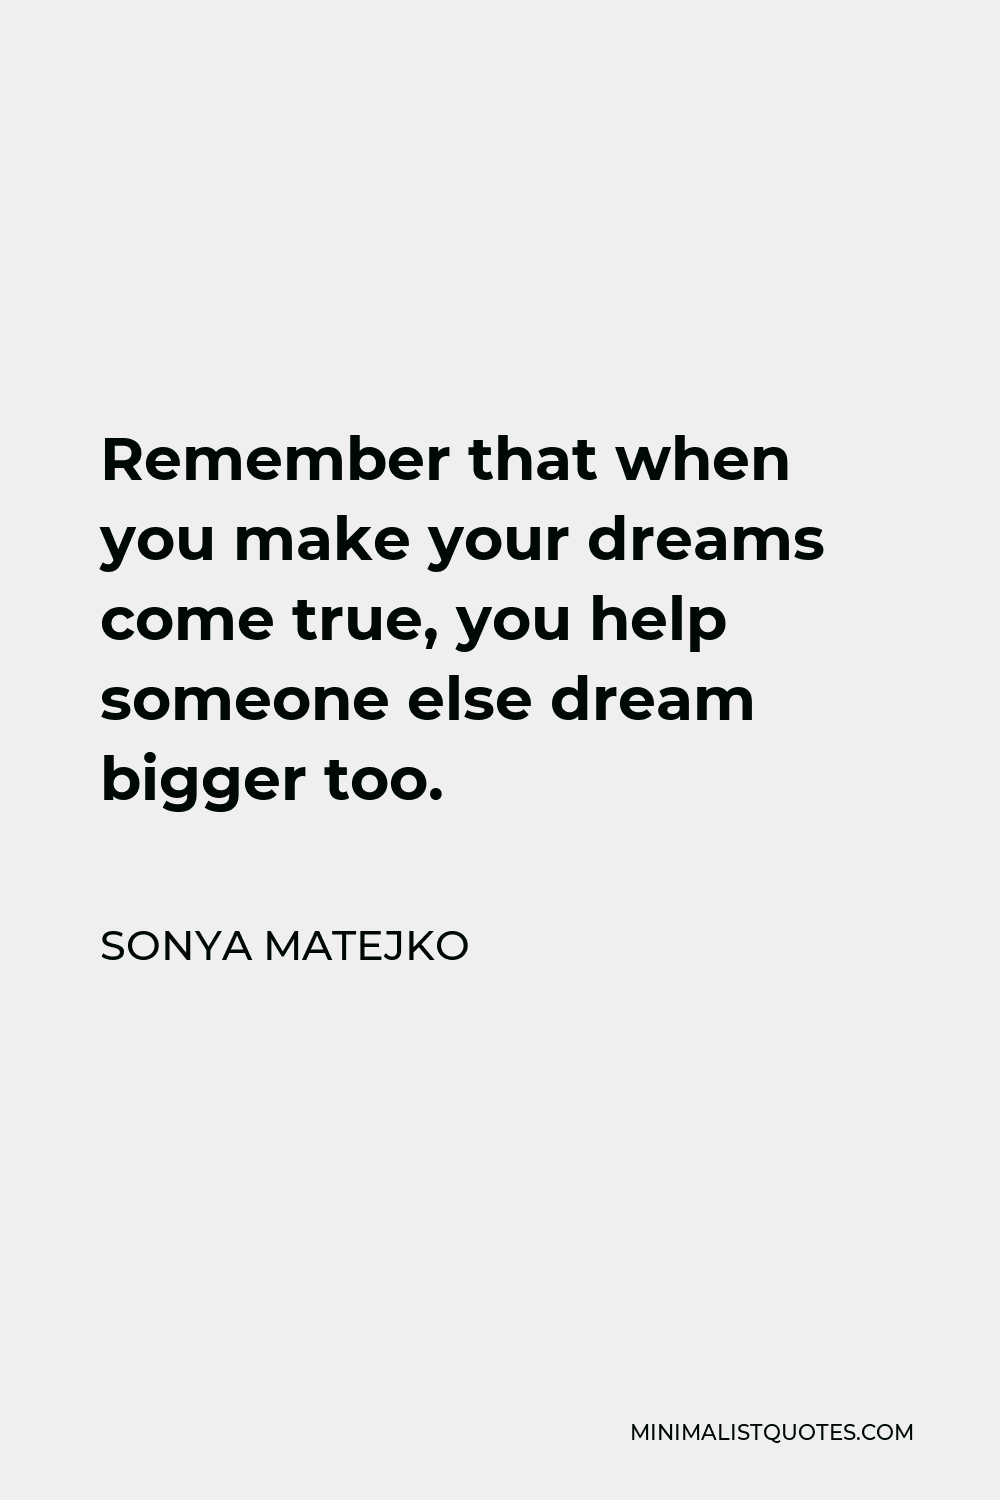 Sonya Matejko Quote - Remember that when you make your dreams come true, you help someone else dream bigger too.